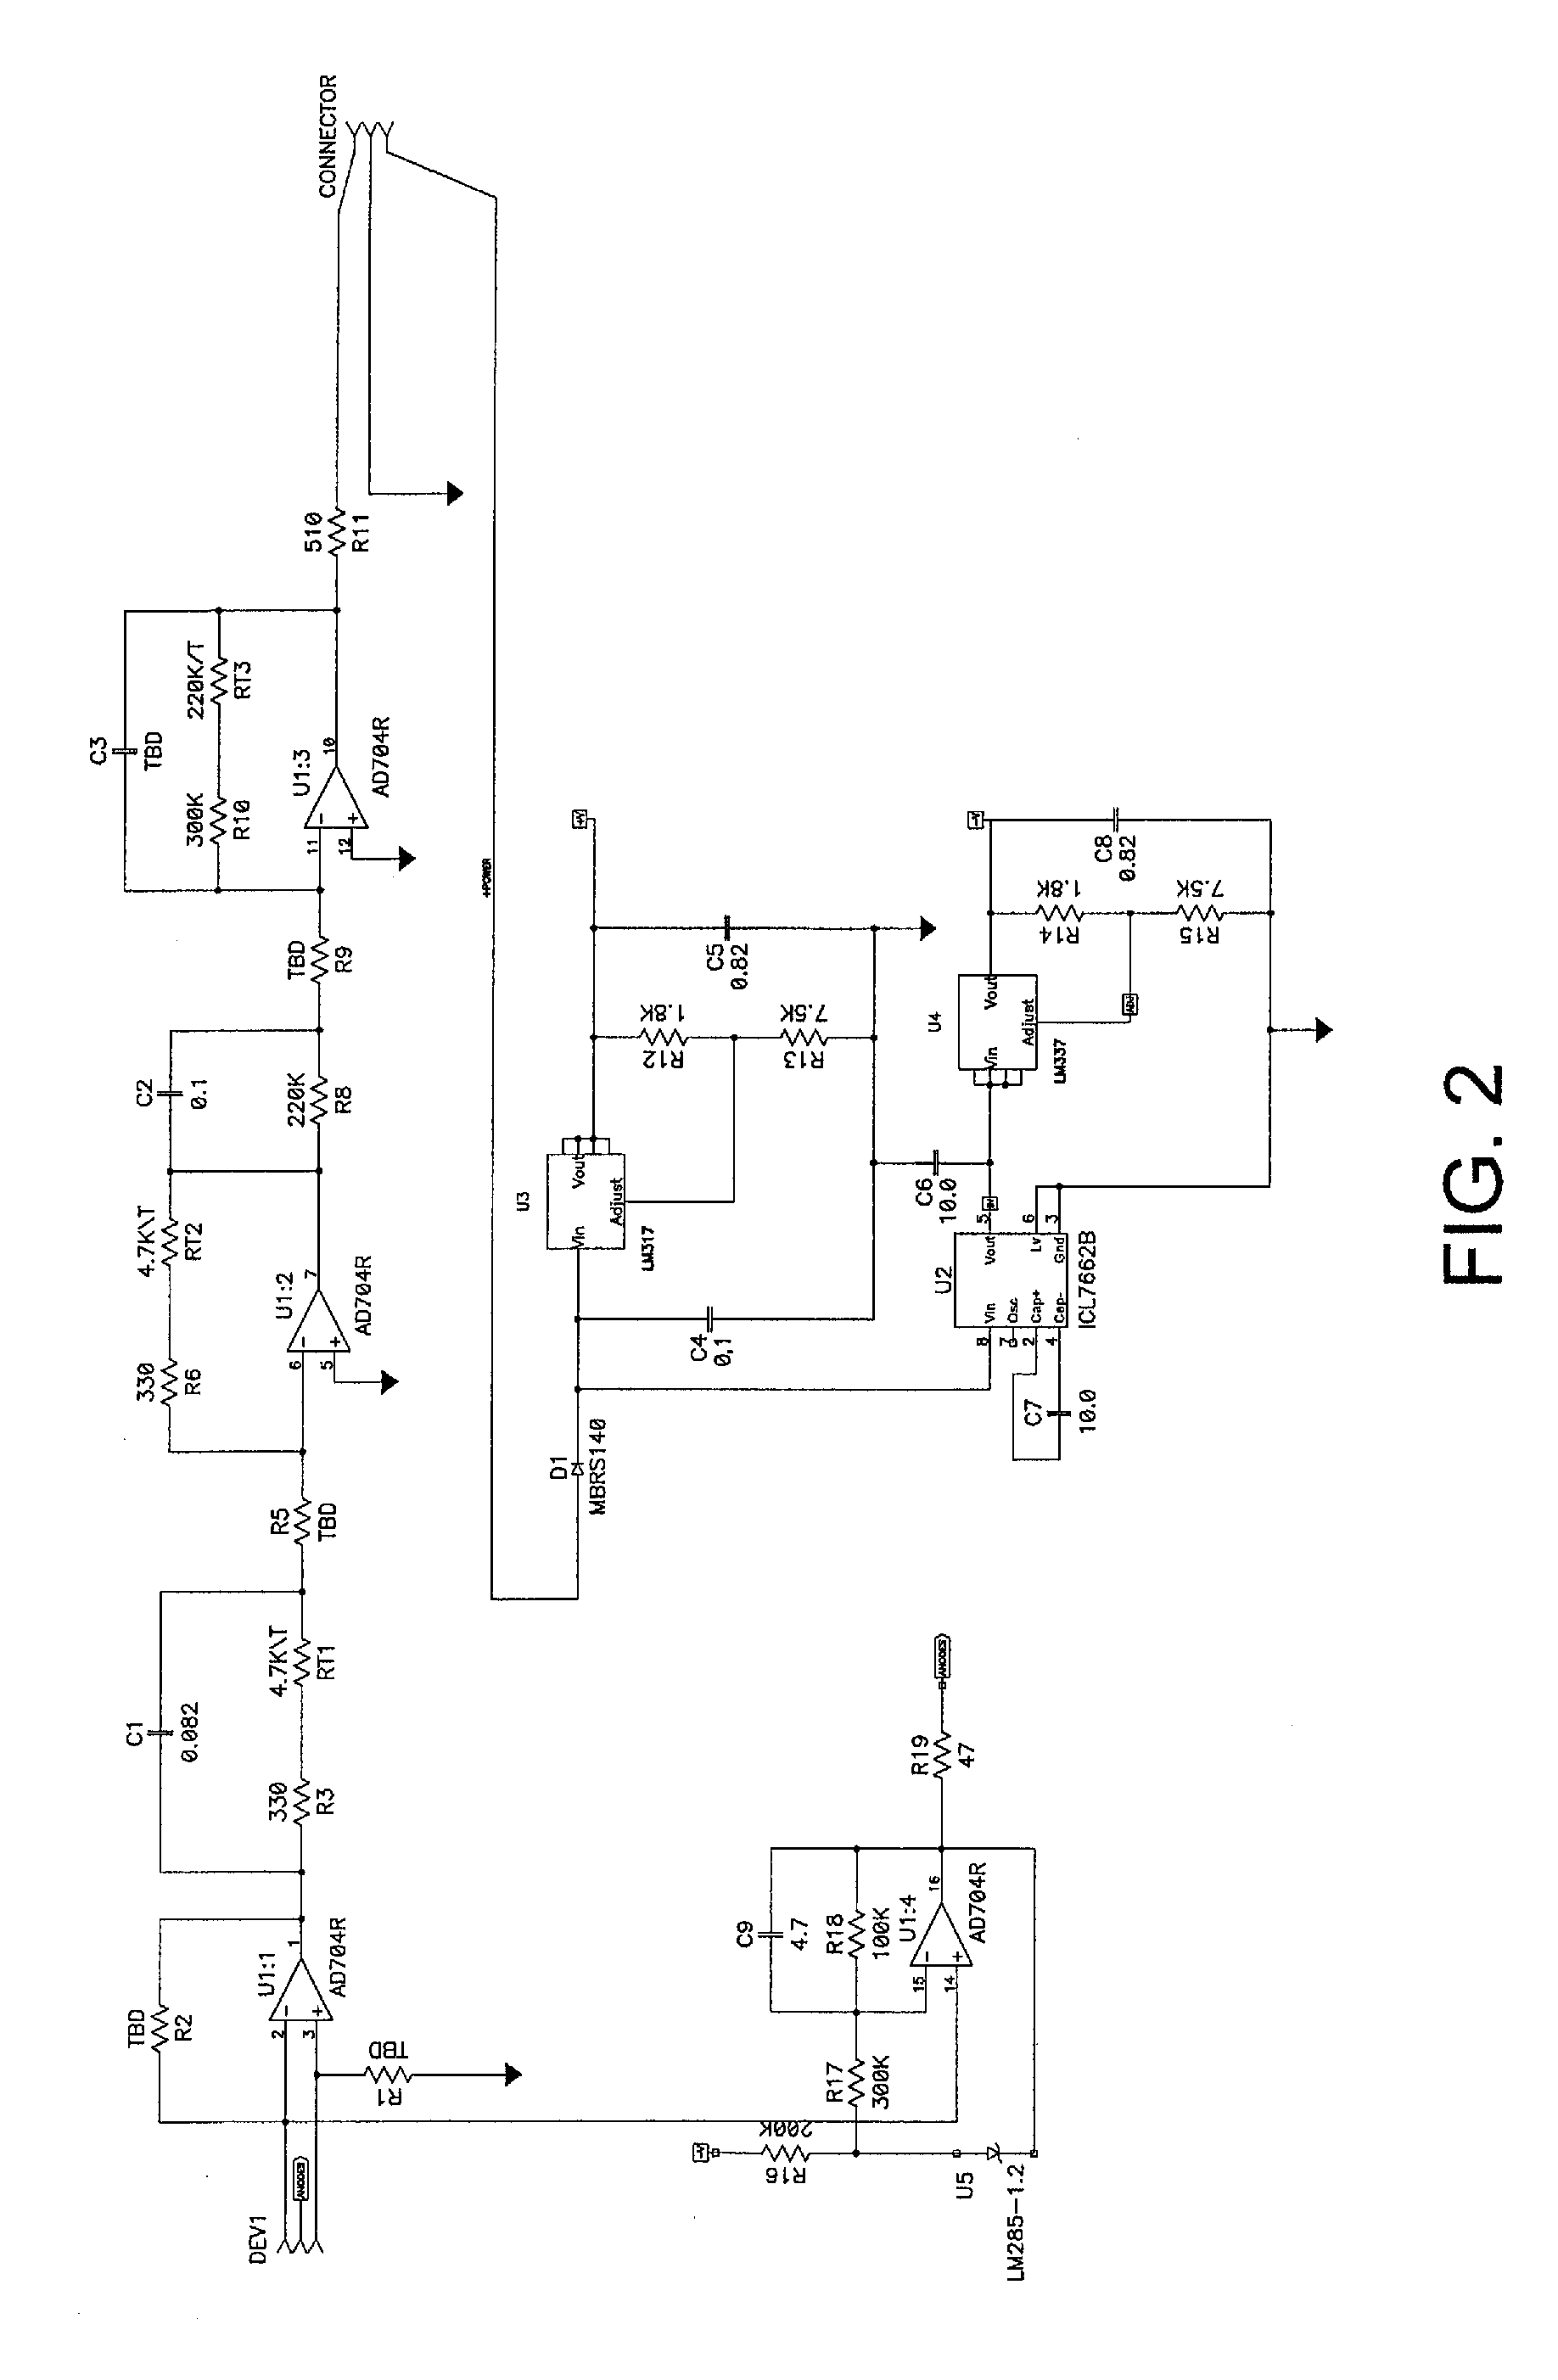 Convective Accelerometer with "Positive' or "Negative" Inertial Mass